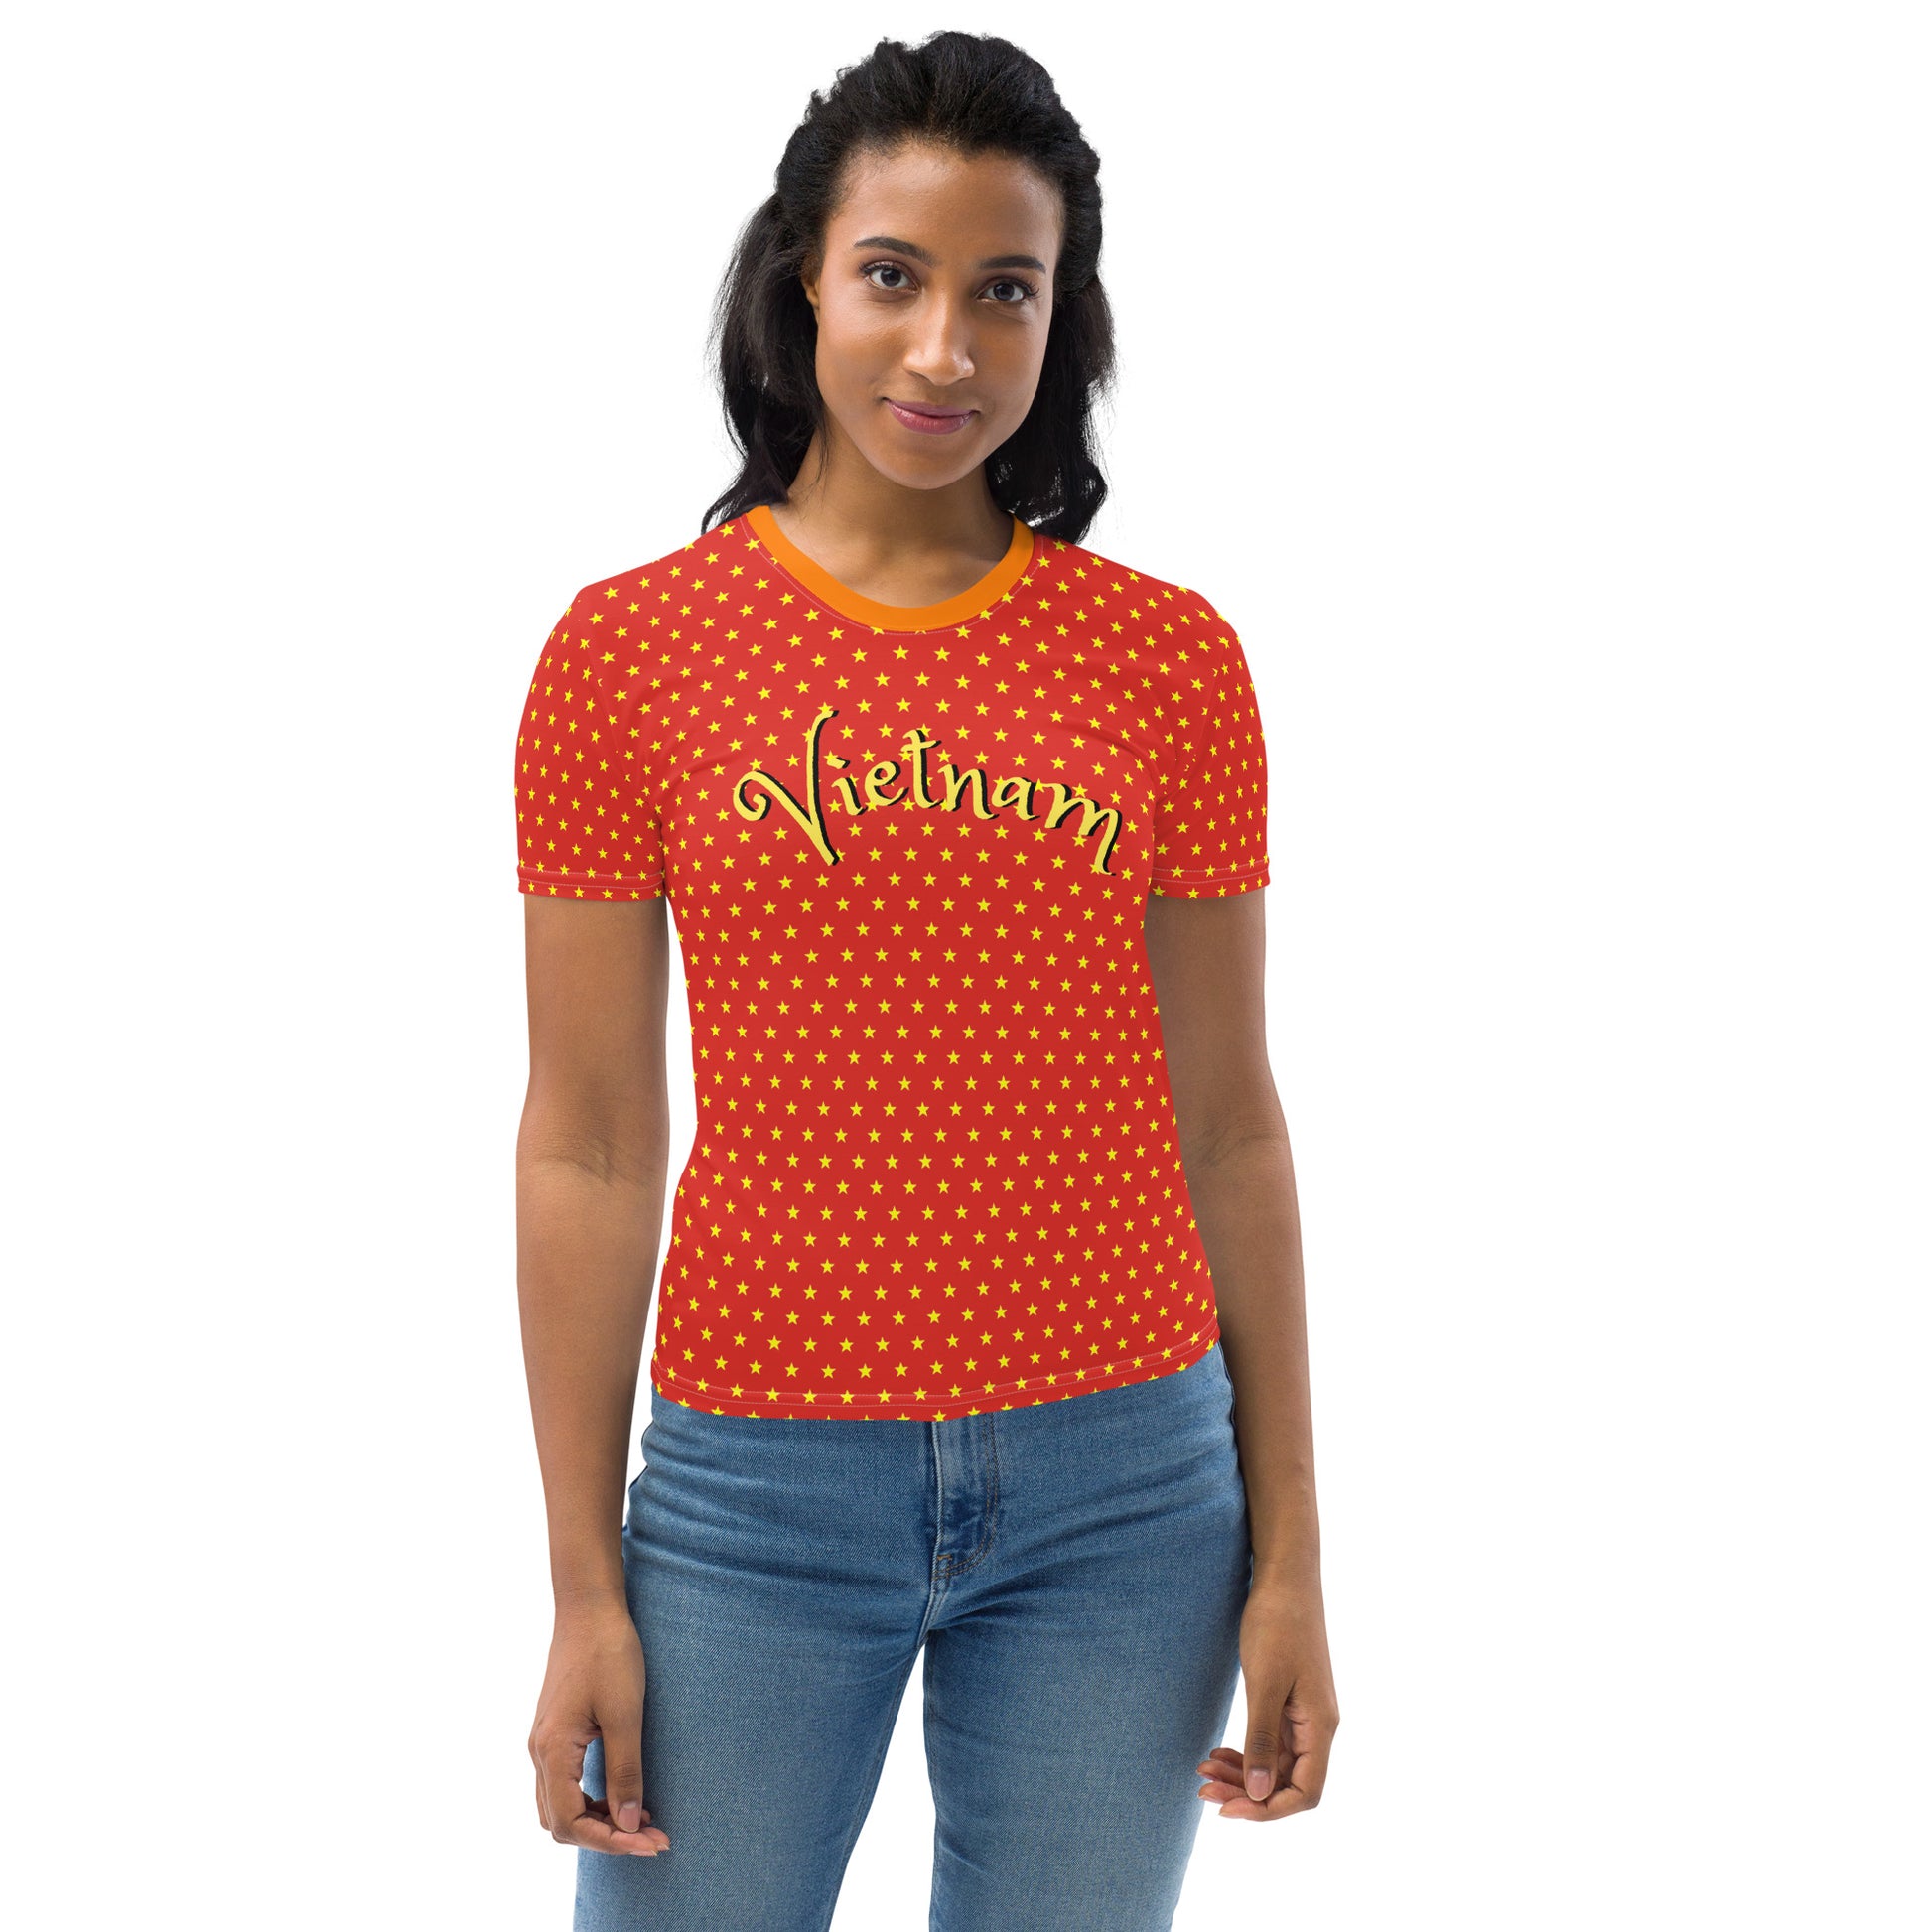 Unique T-Shirt for Women: Yellow Polka Dots with Vietnam Theme